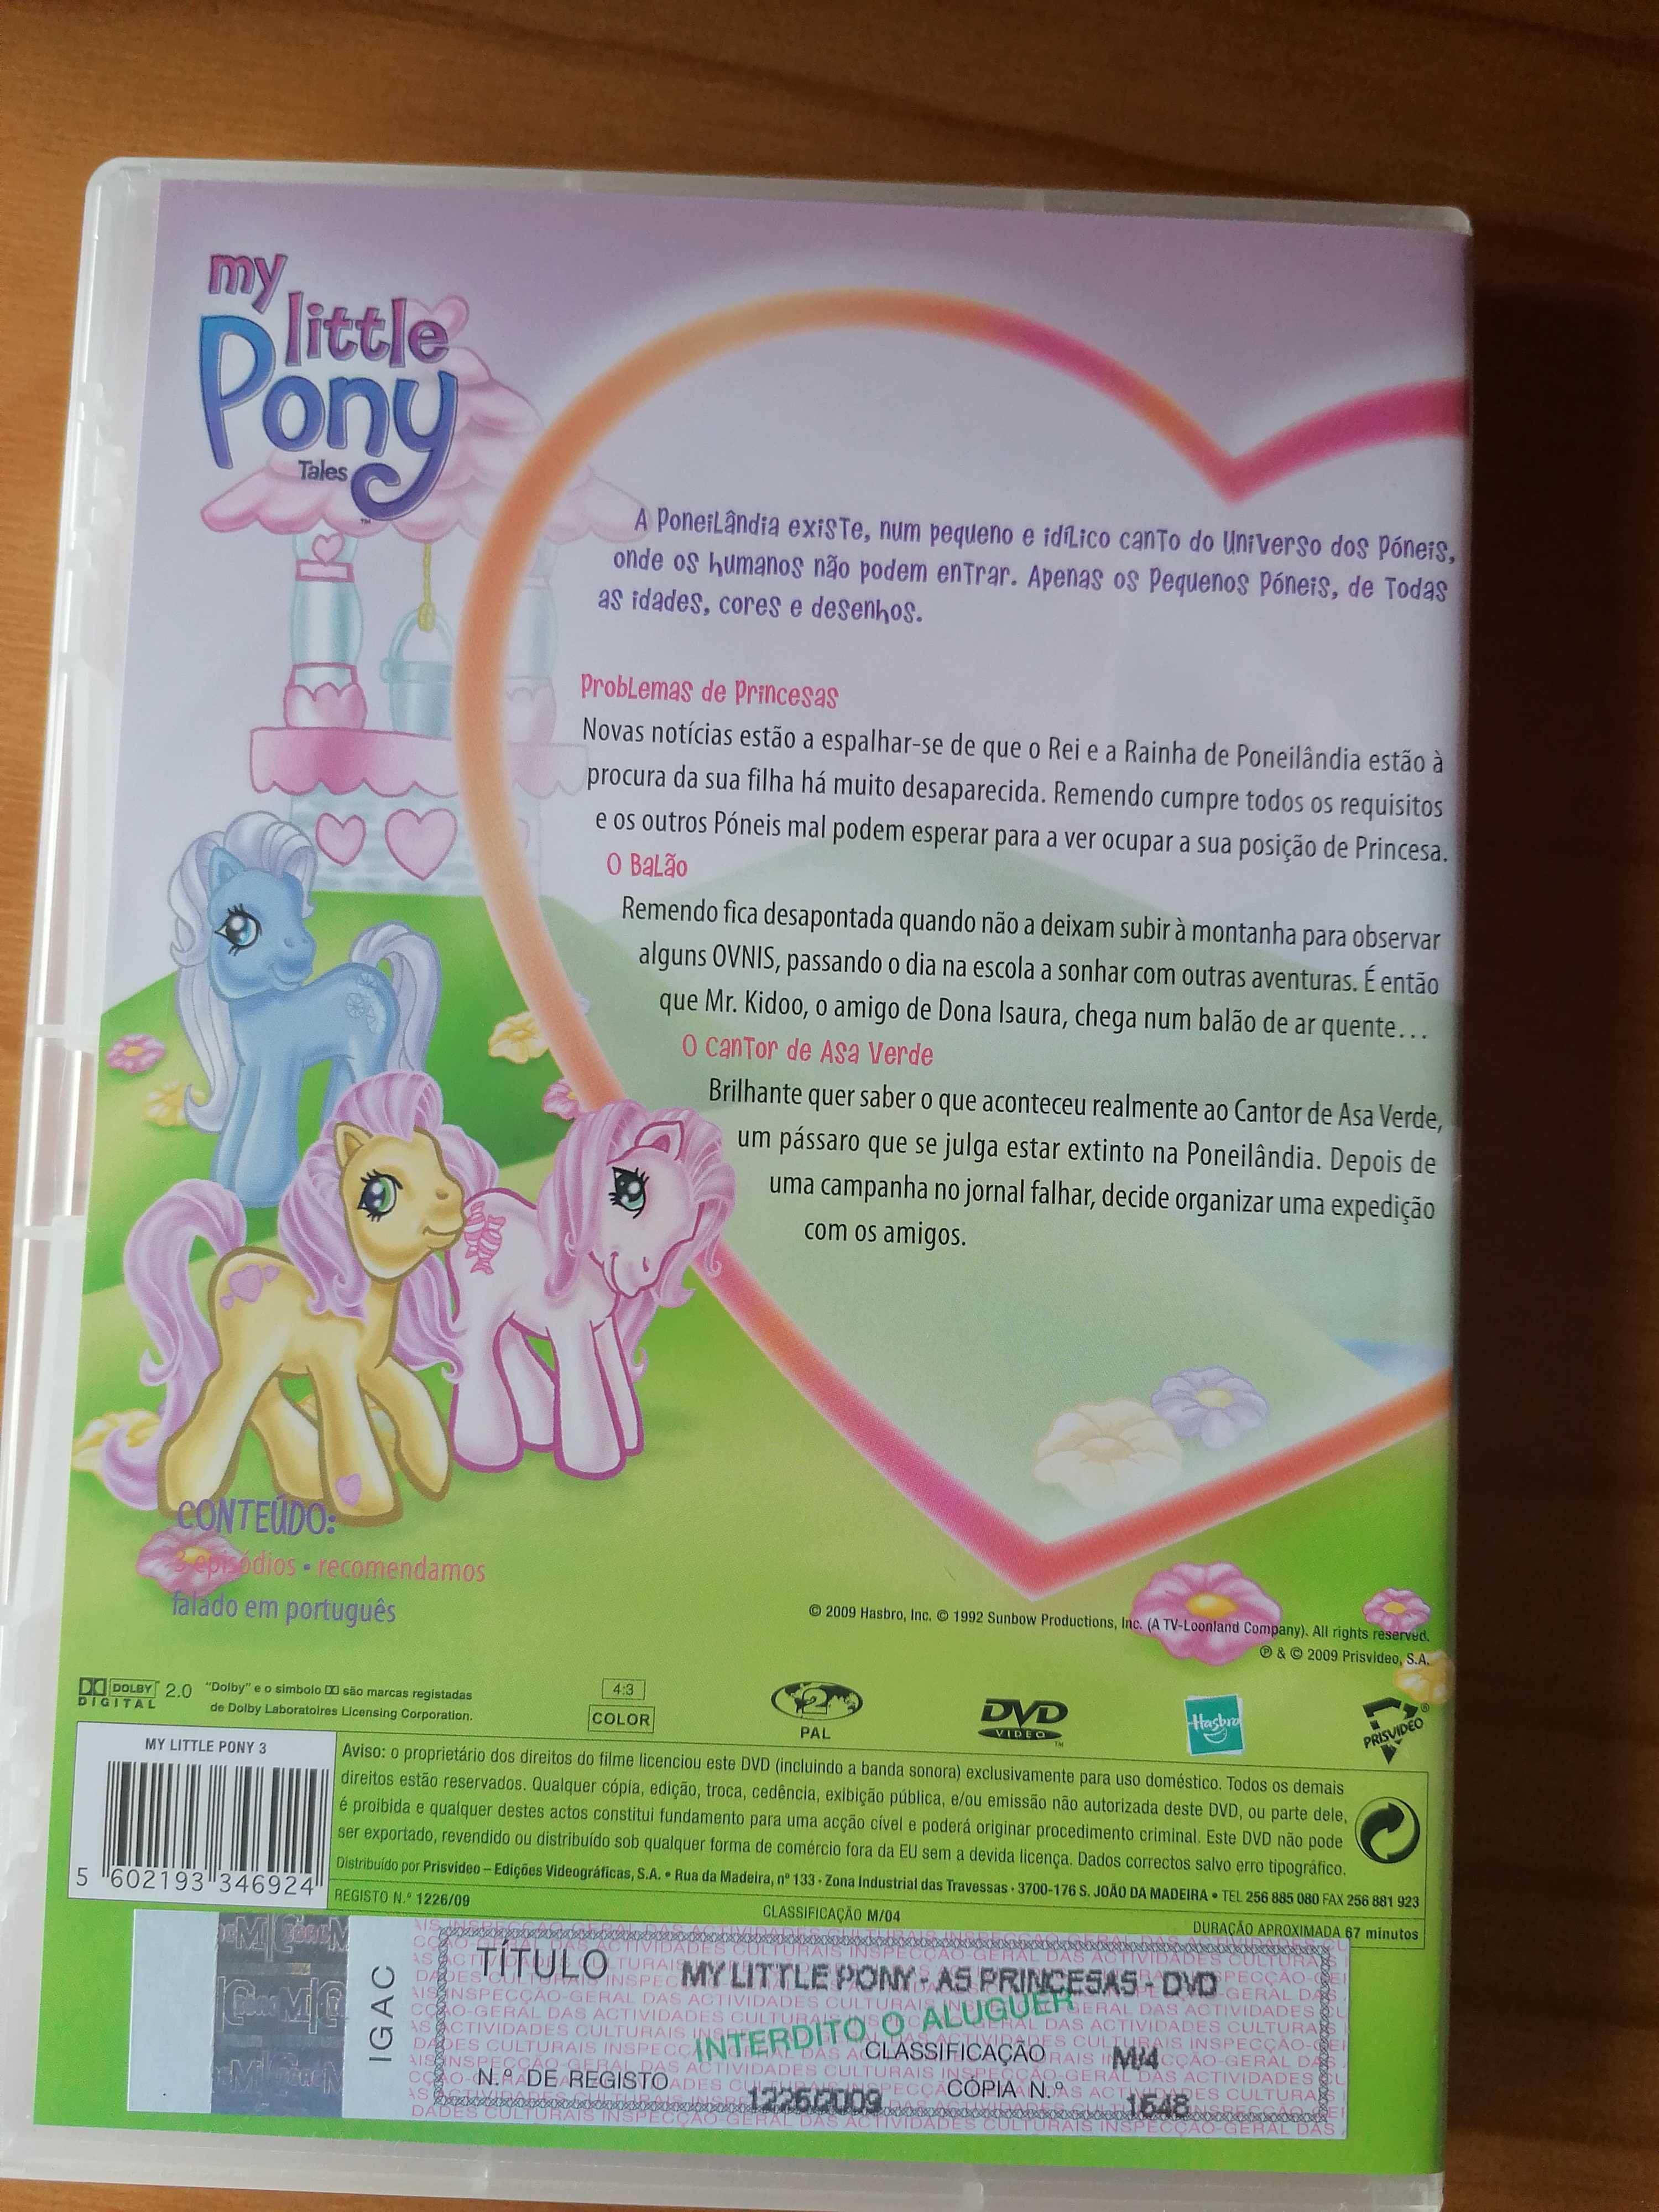 my little Pony Tales- "As Princesas"